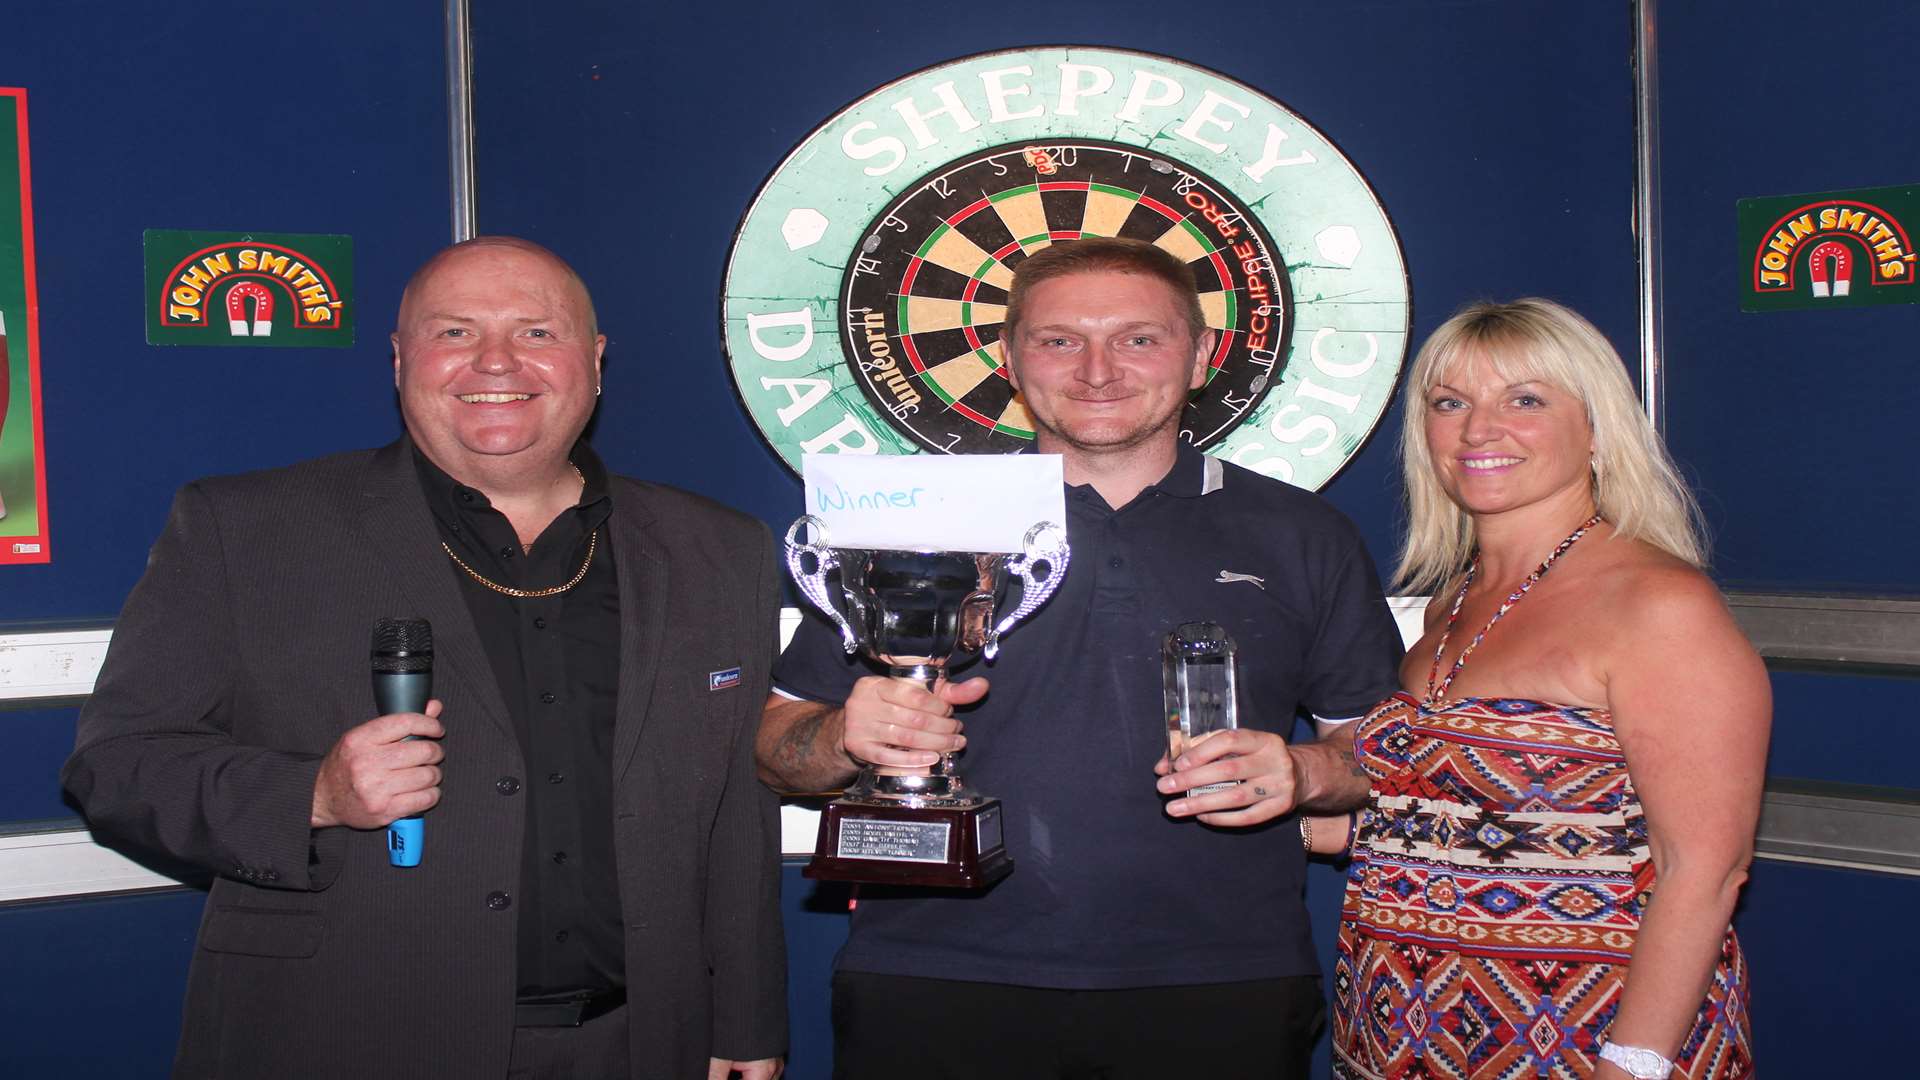 Maidstone's Barry Knight (centre) beat Paul McDine in the 2014 Sheppey Darts Classic final